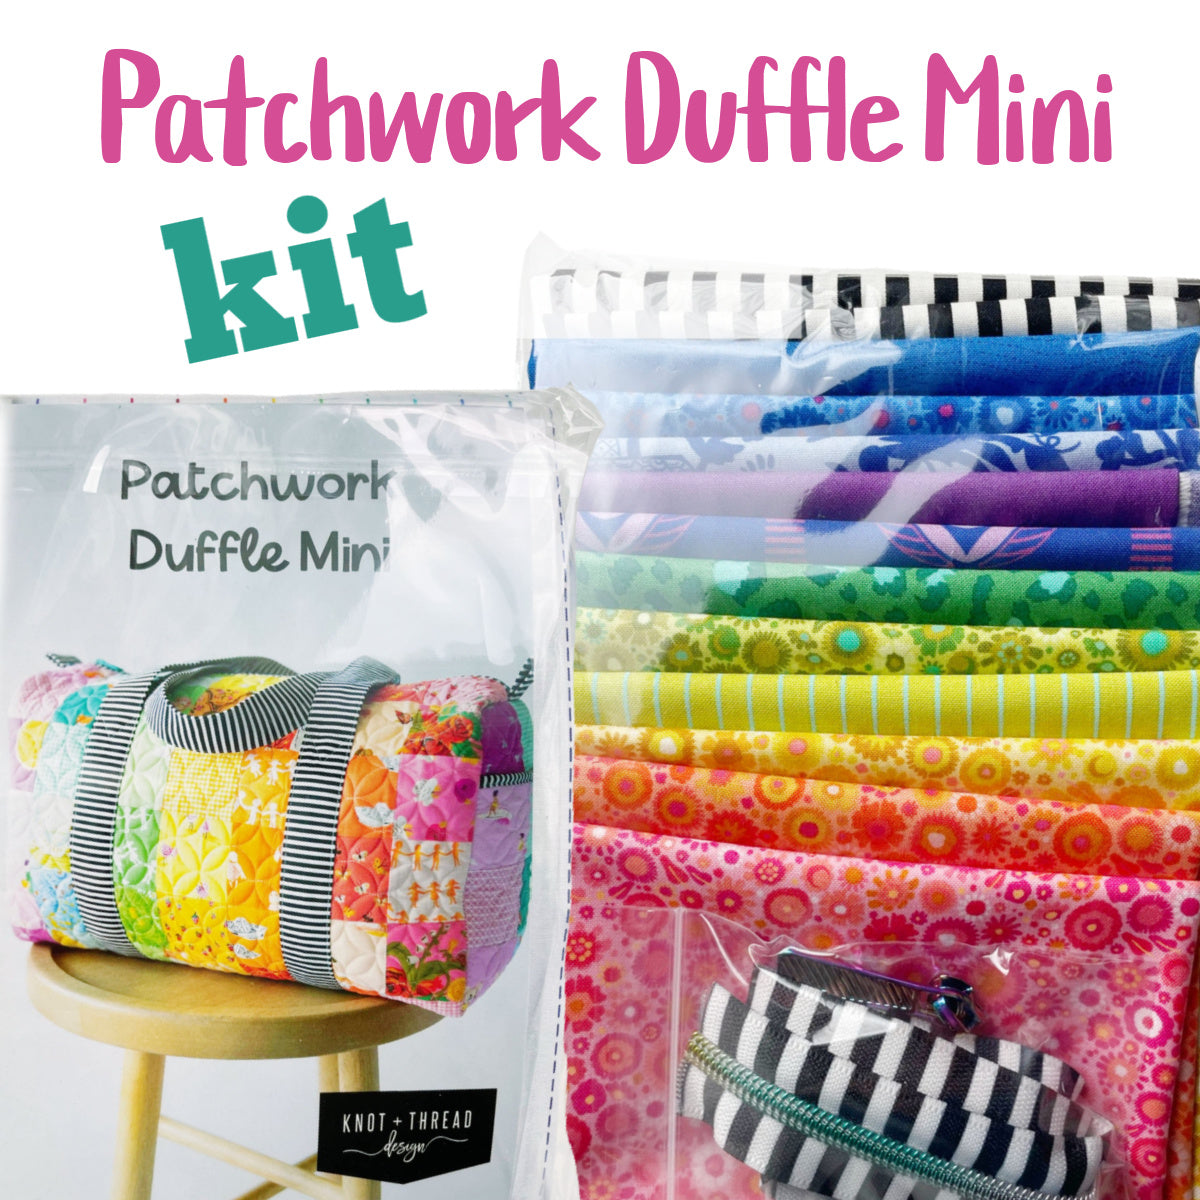 Patchwork Duffle Kit - Incl. all supplies